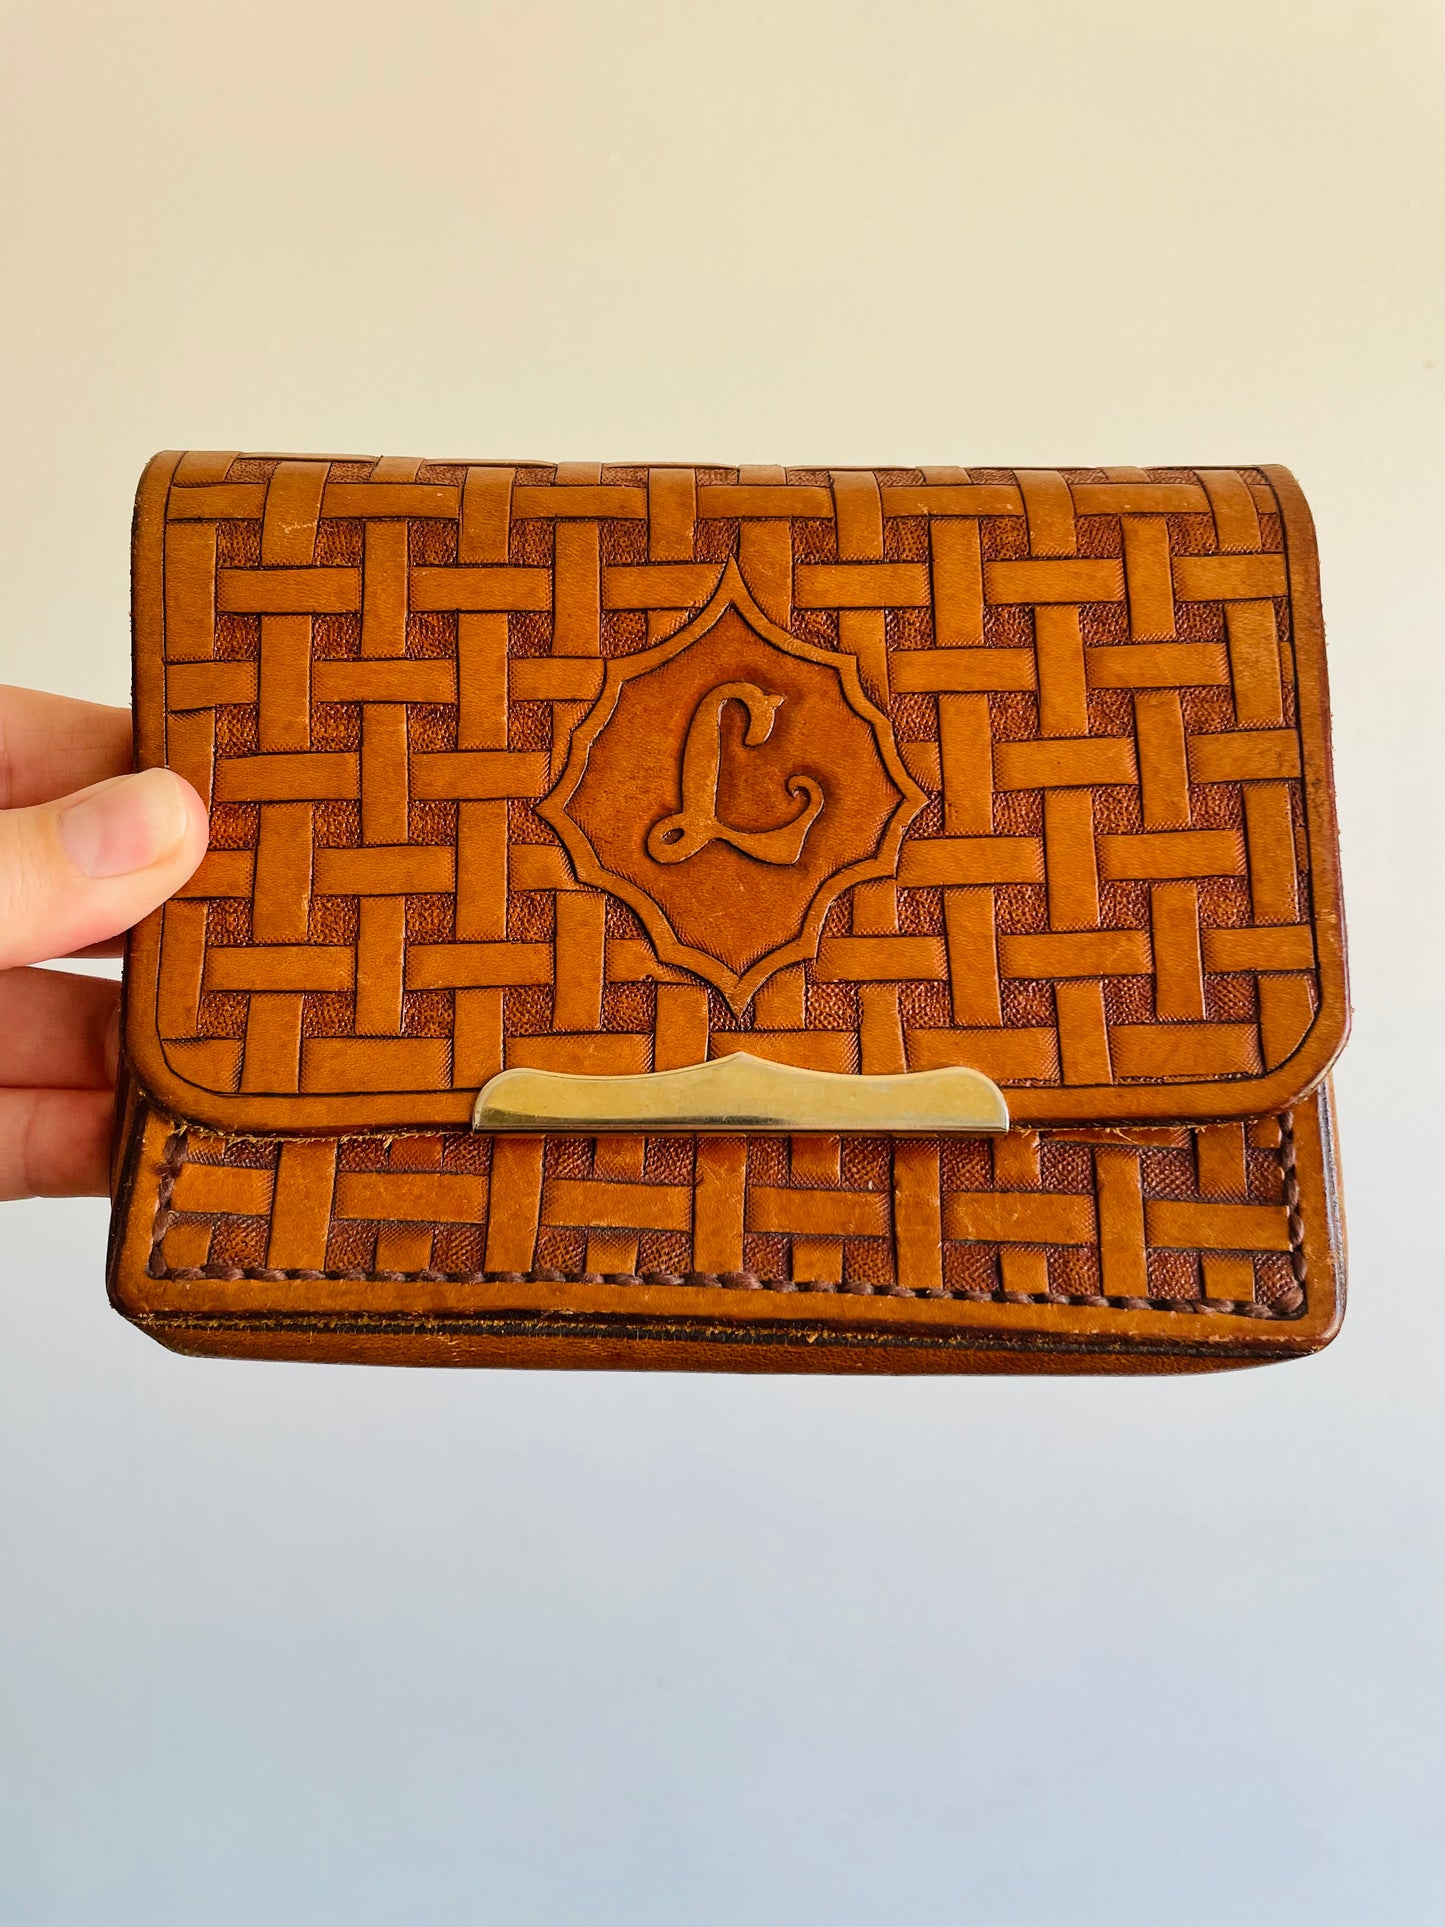 Tooled Leather Clutch Wallet with Monogrammed Letter L